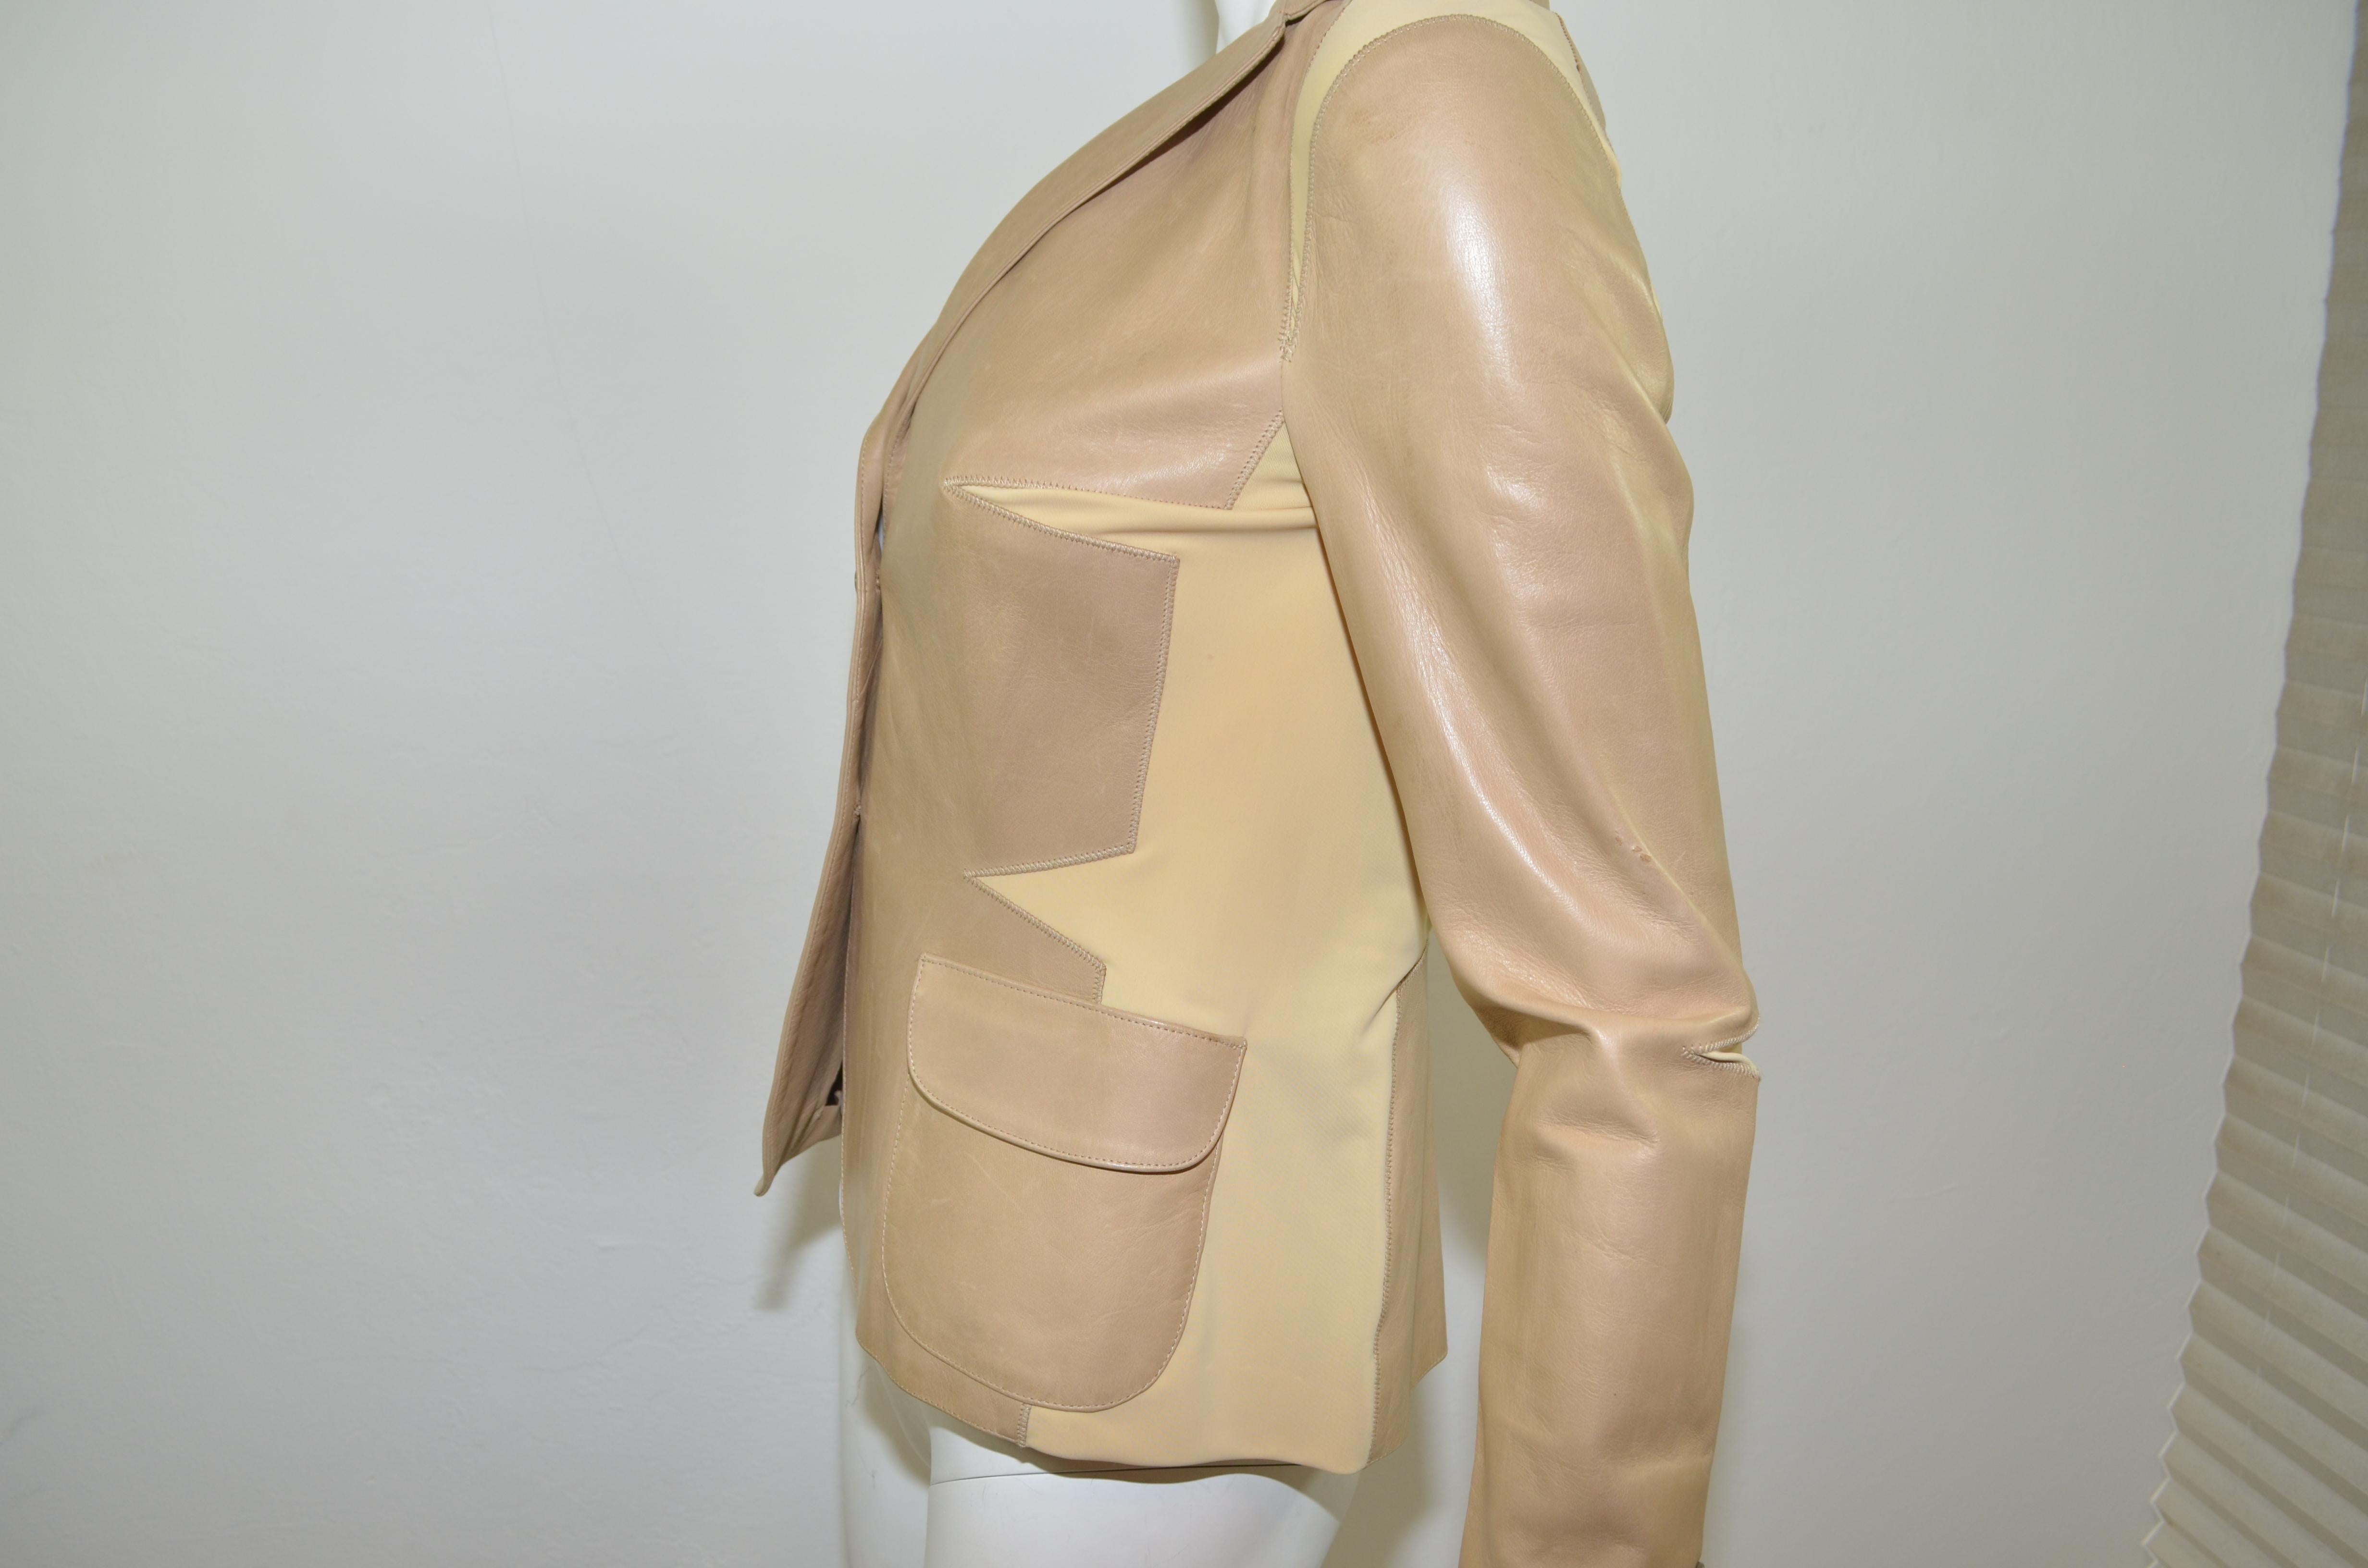 Gucci Leather Blazer Jacket with Mesh Panels 3